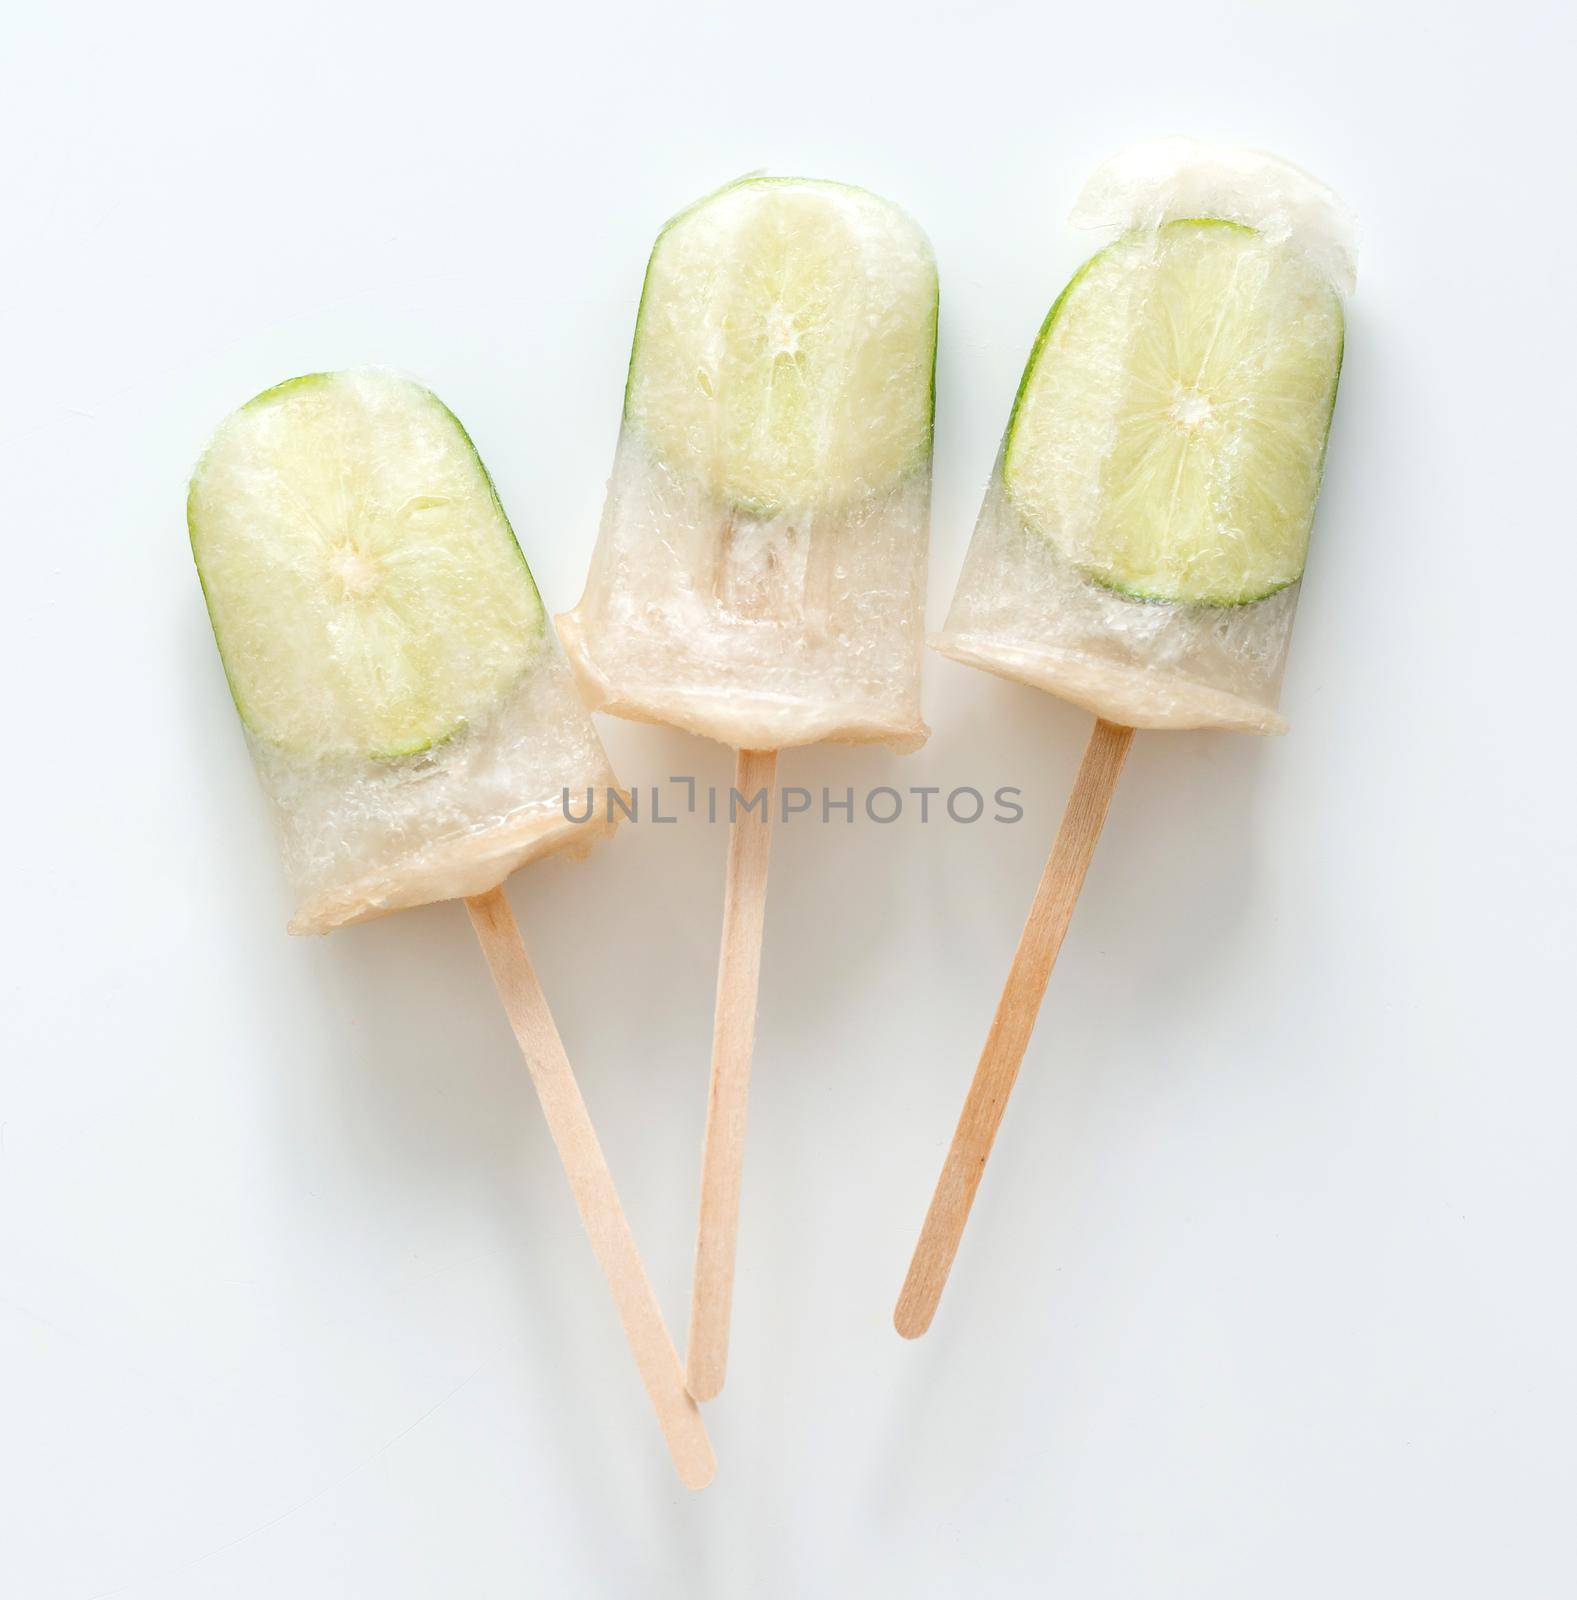 homemade ice cream with lime isolatad on a white background